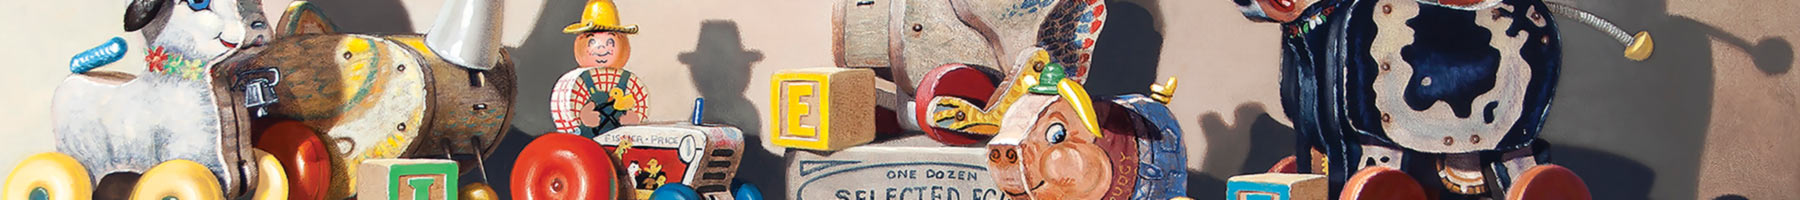 Detail of painting of wooden toy farm animals by Richard Hall, titled EIEIO